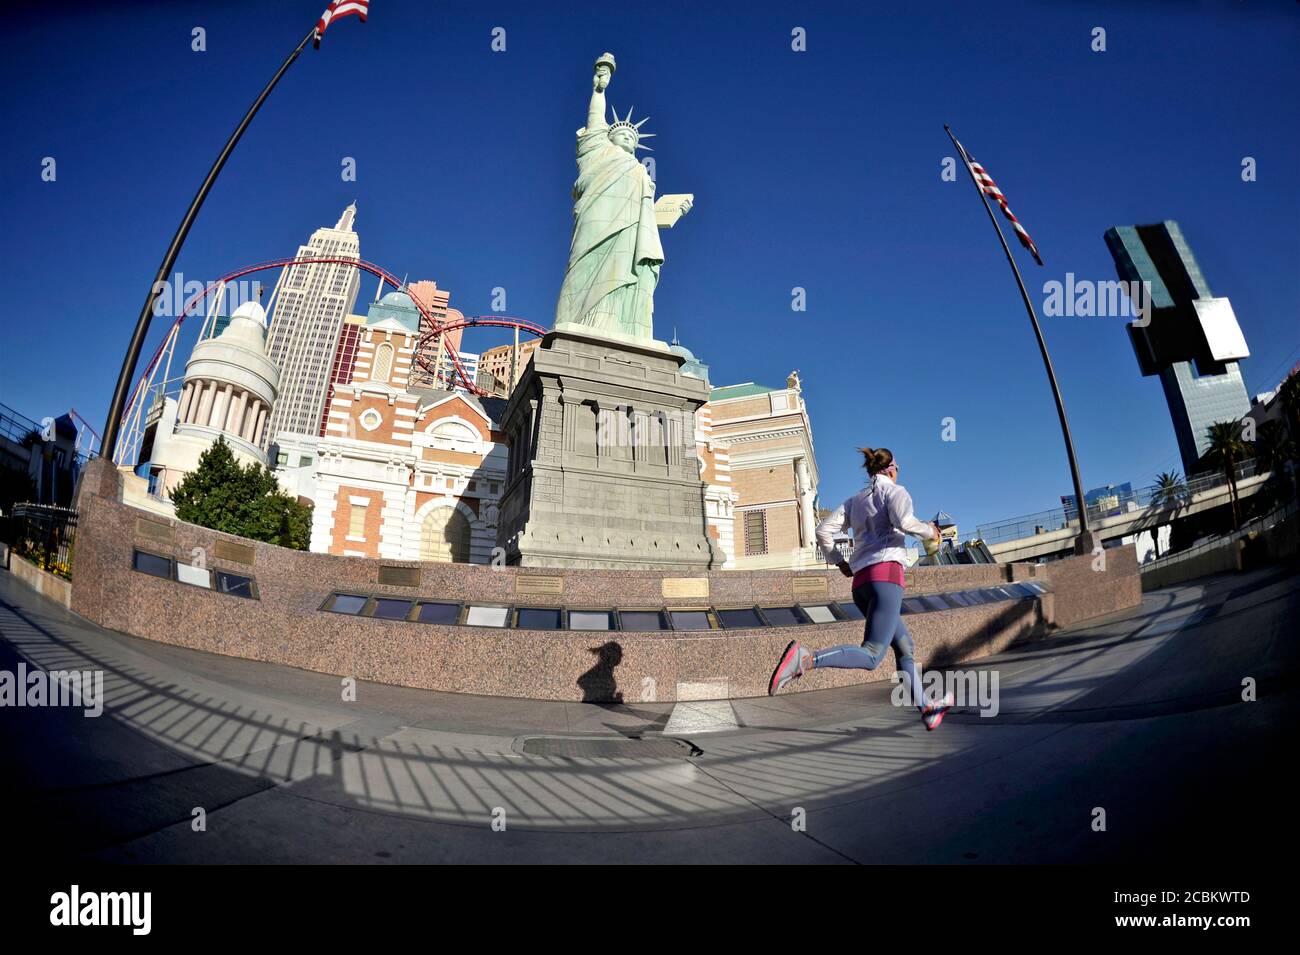 Mid adult female runner running in front of statue of liberty on las Vegas Strip, Las Vegas, Nevada, USA Stock Photo